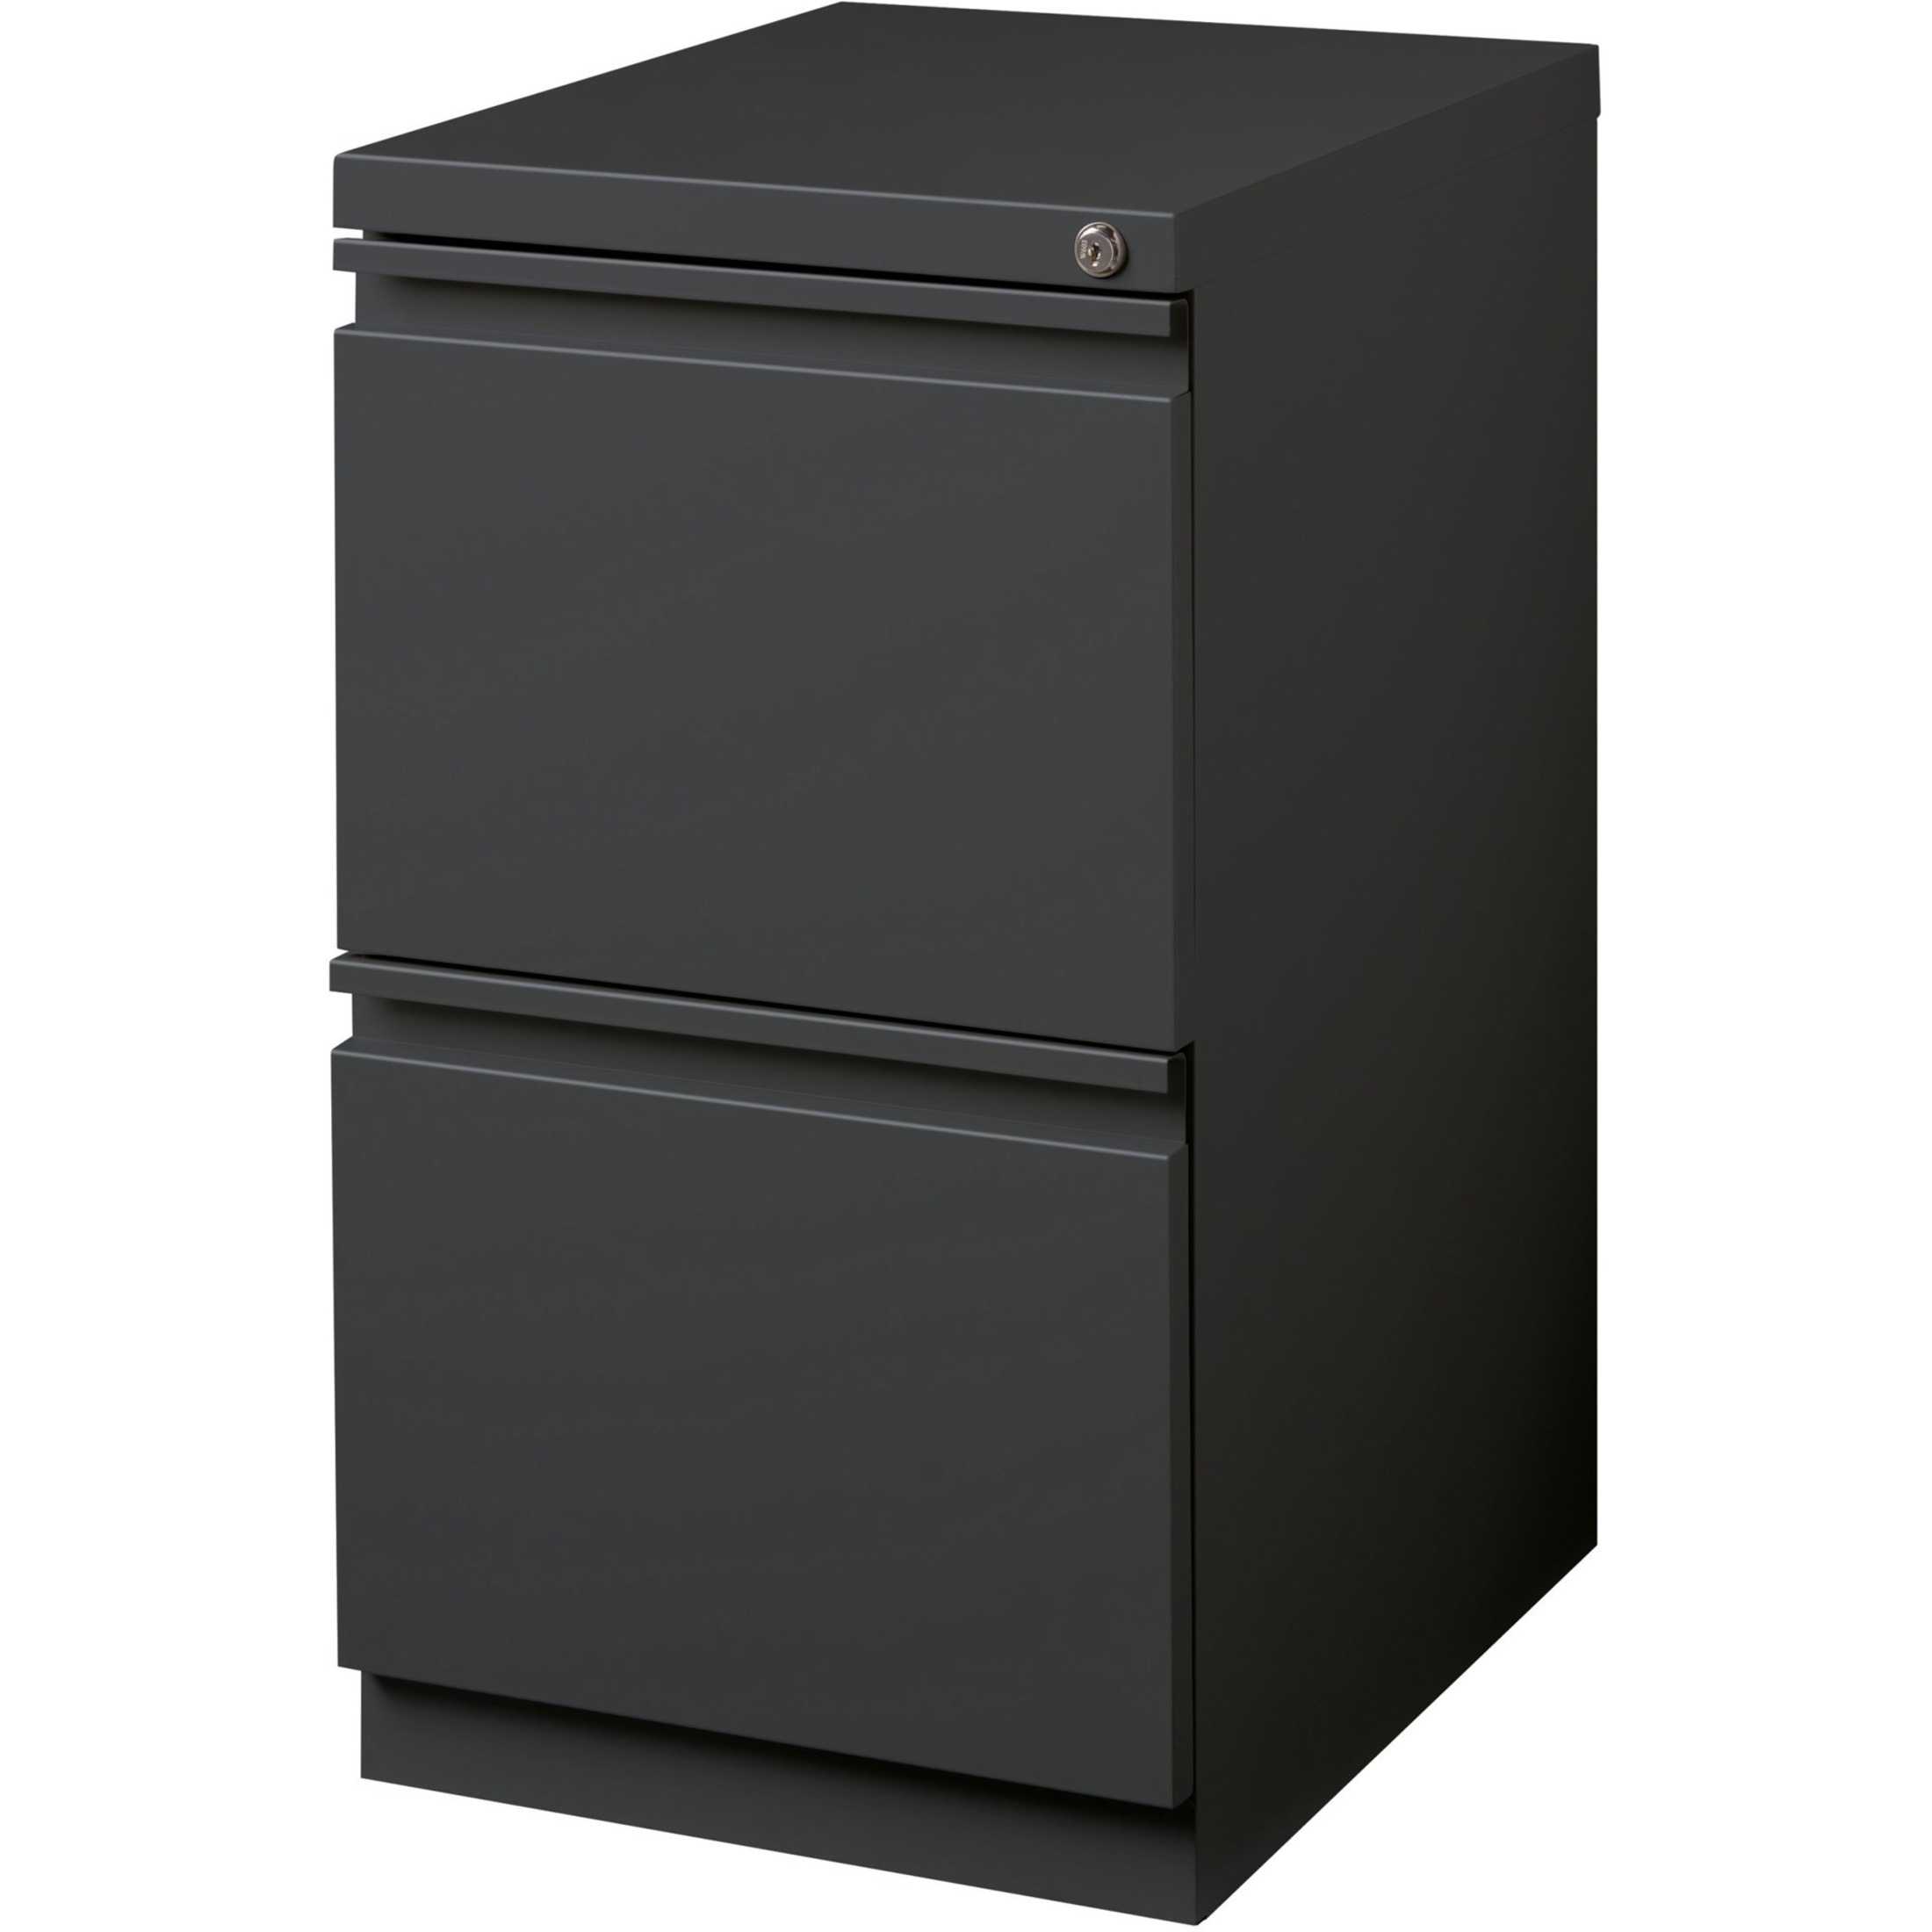 Lorell® 19-7/8"D Vertical 2-Drawer Mobile Pedestal File Cabinet, Charcoal - image 5 of 8